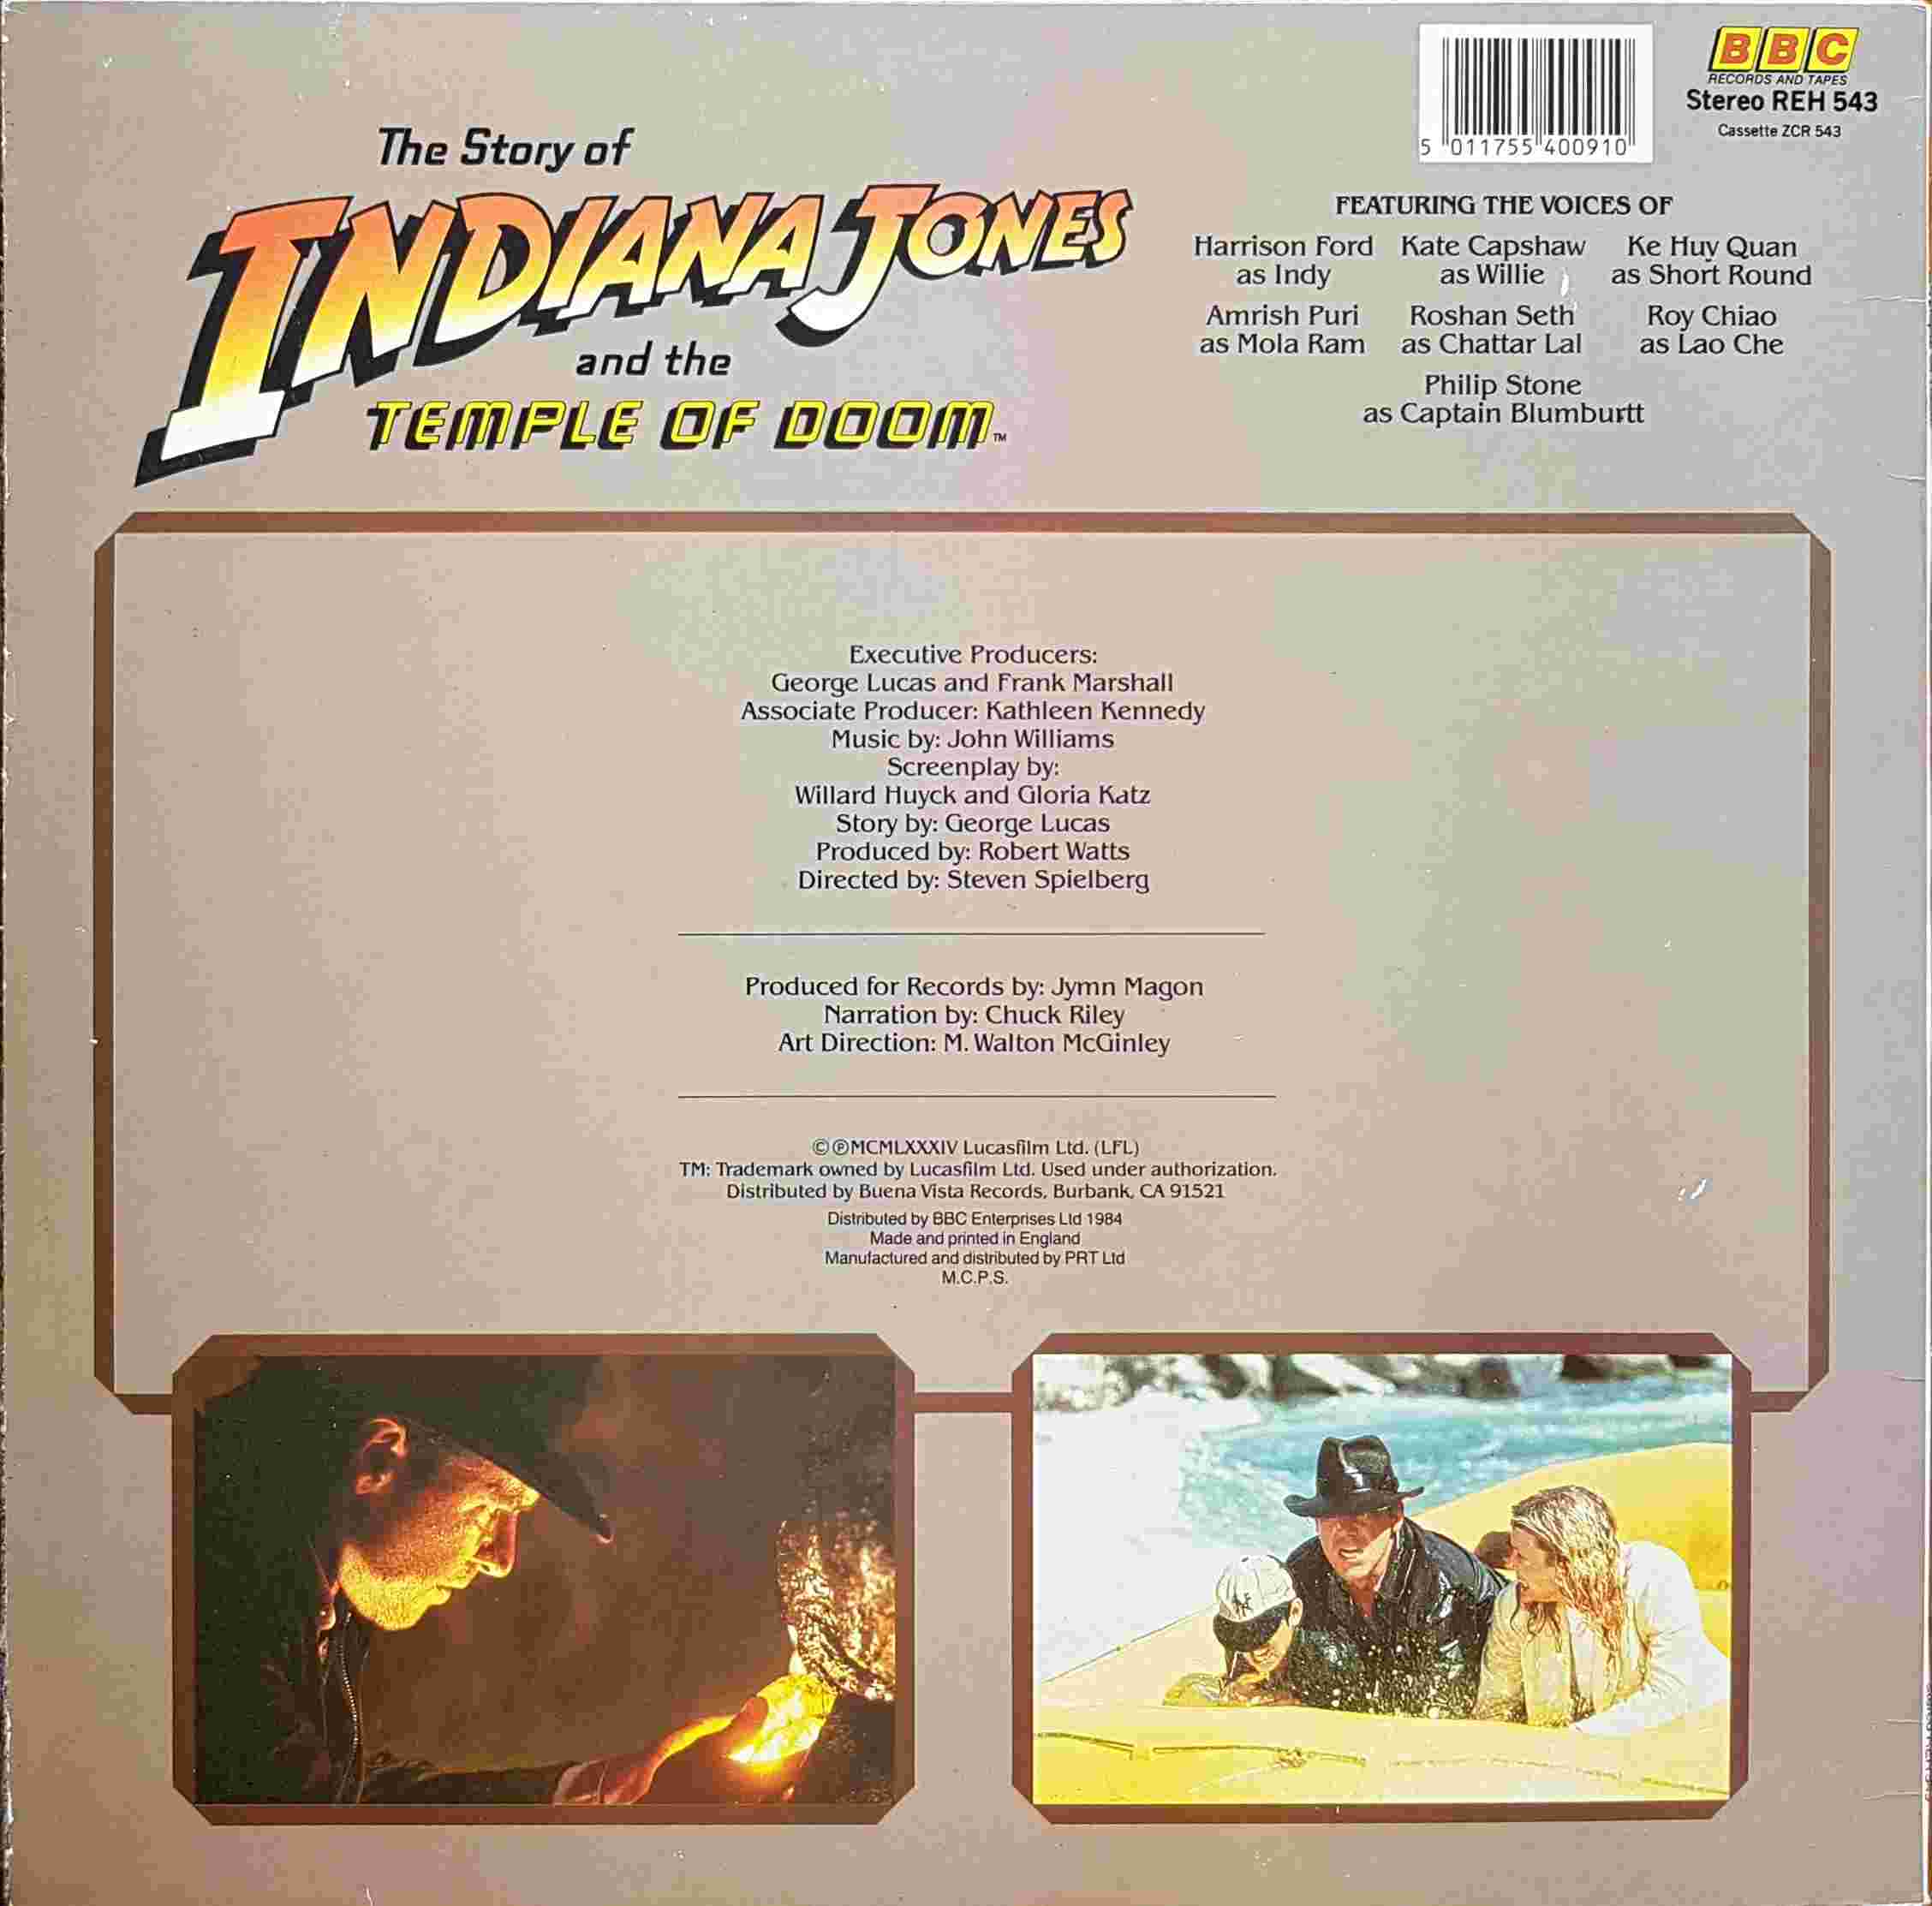 Picture of REH 543 Indiana Jones and the temple of doom by artist John Williams from the BBC records and Tapes library